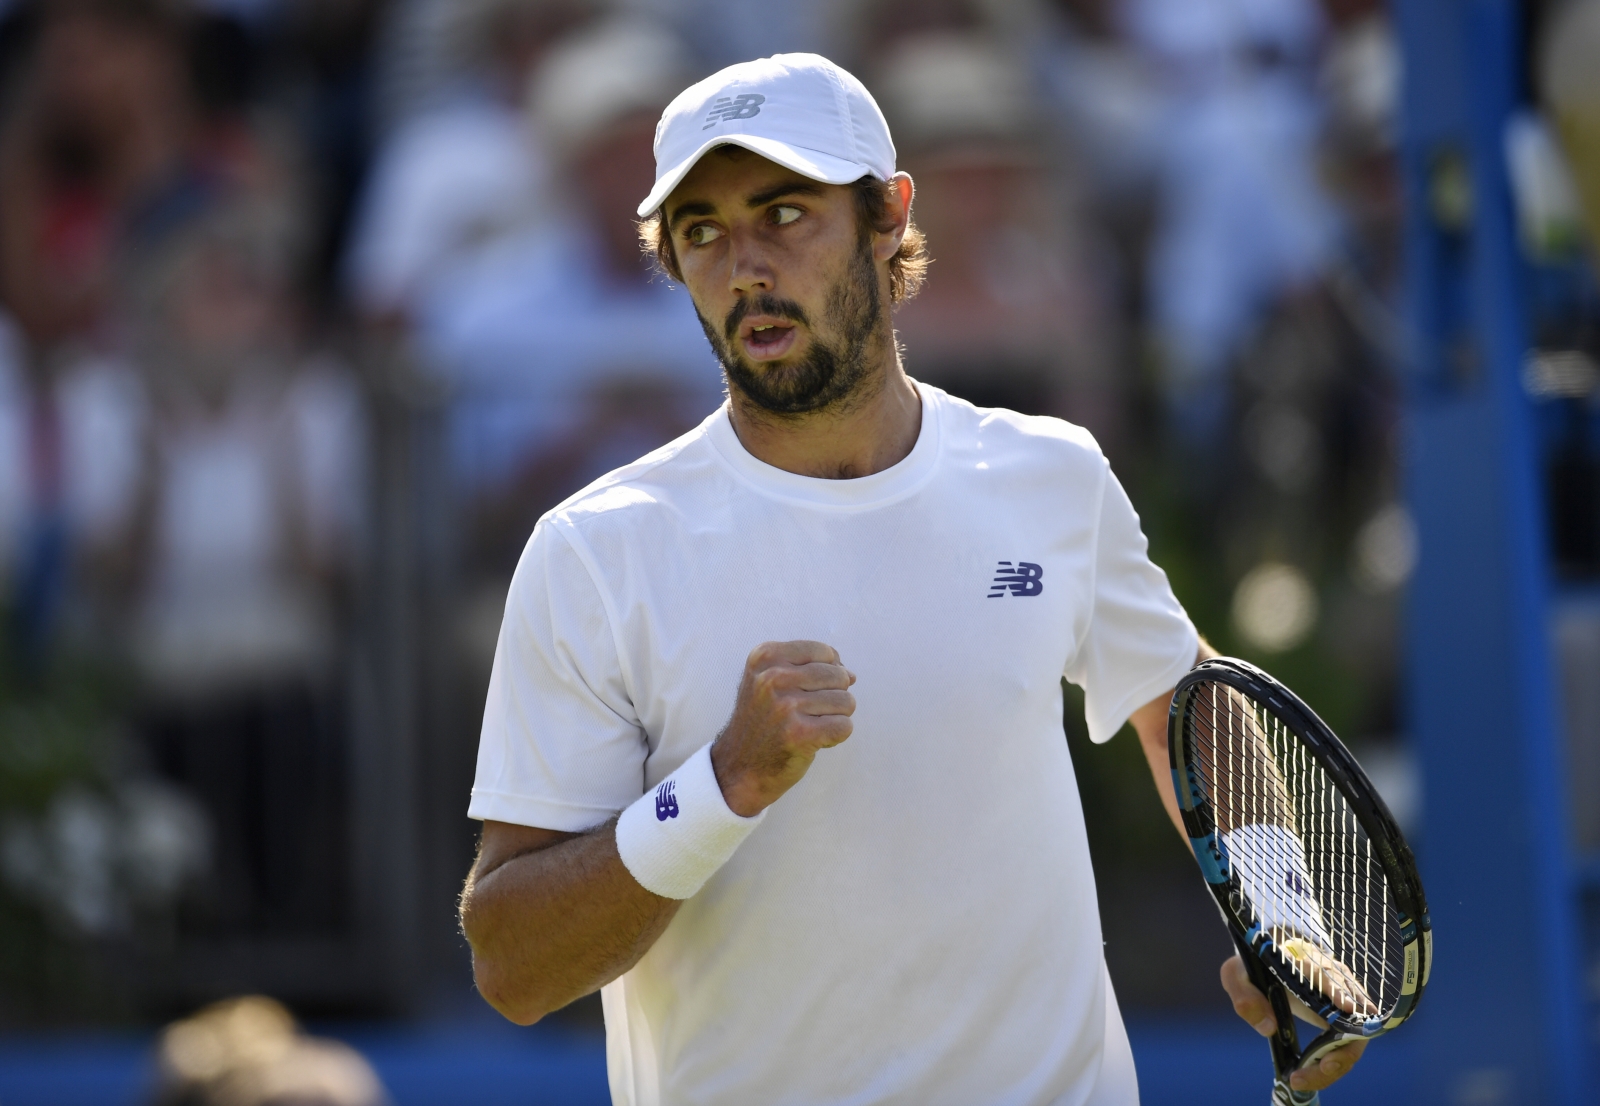 Jordan Thompson stuns tennis world by knocking Andy Murray out of Queen's in straight sets